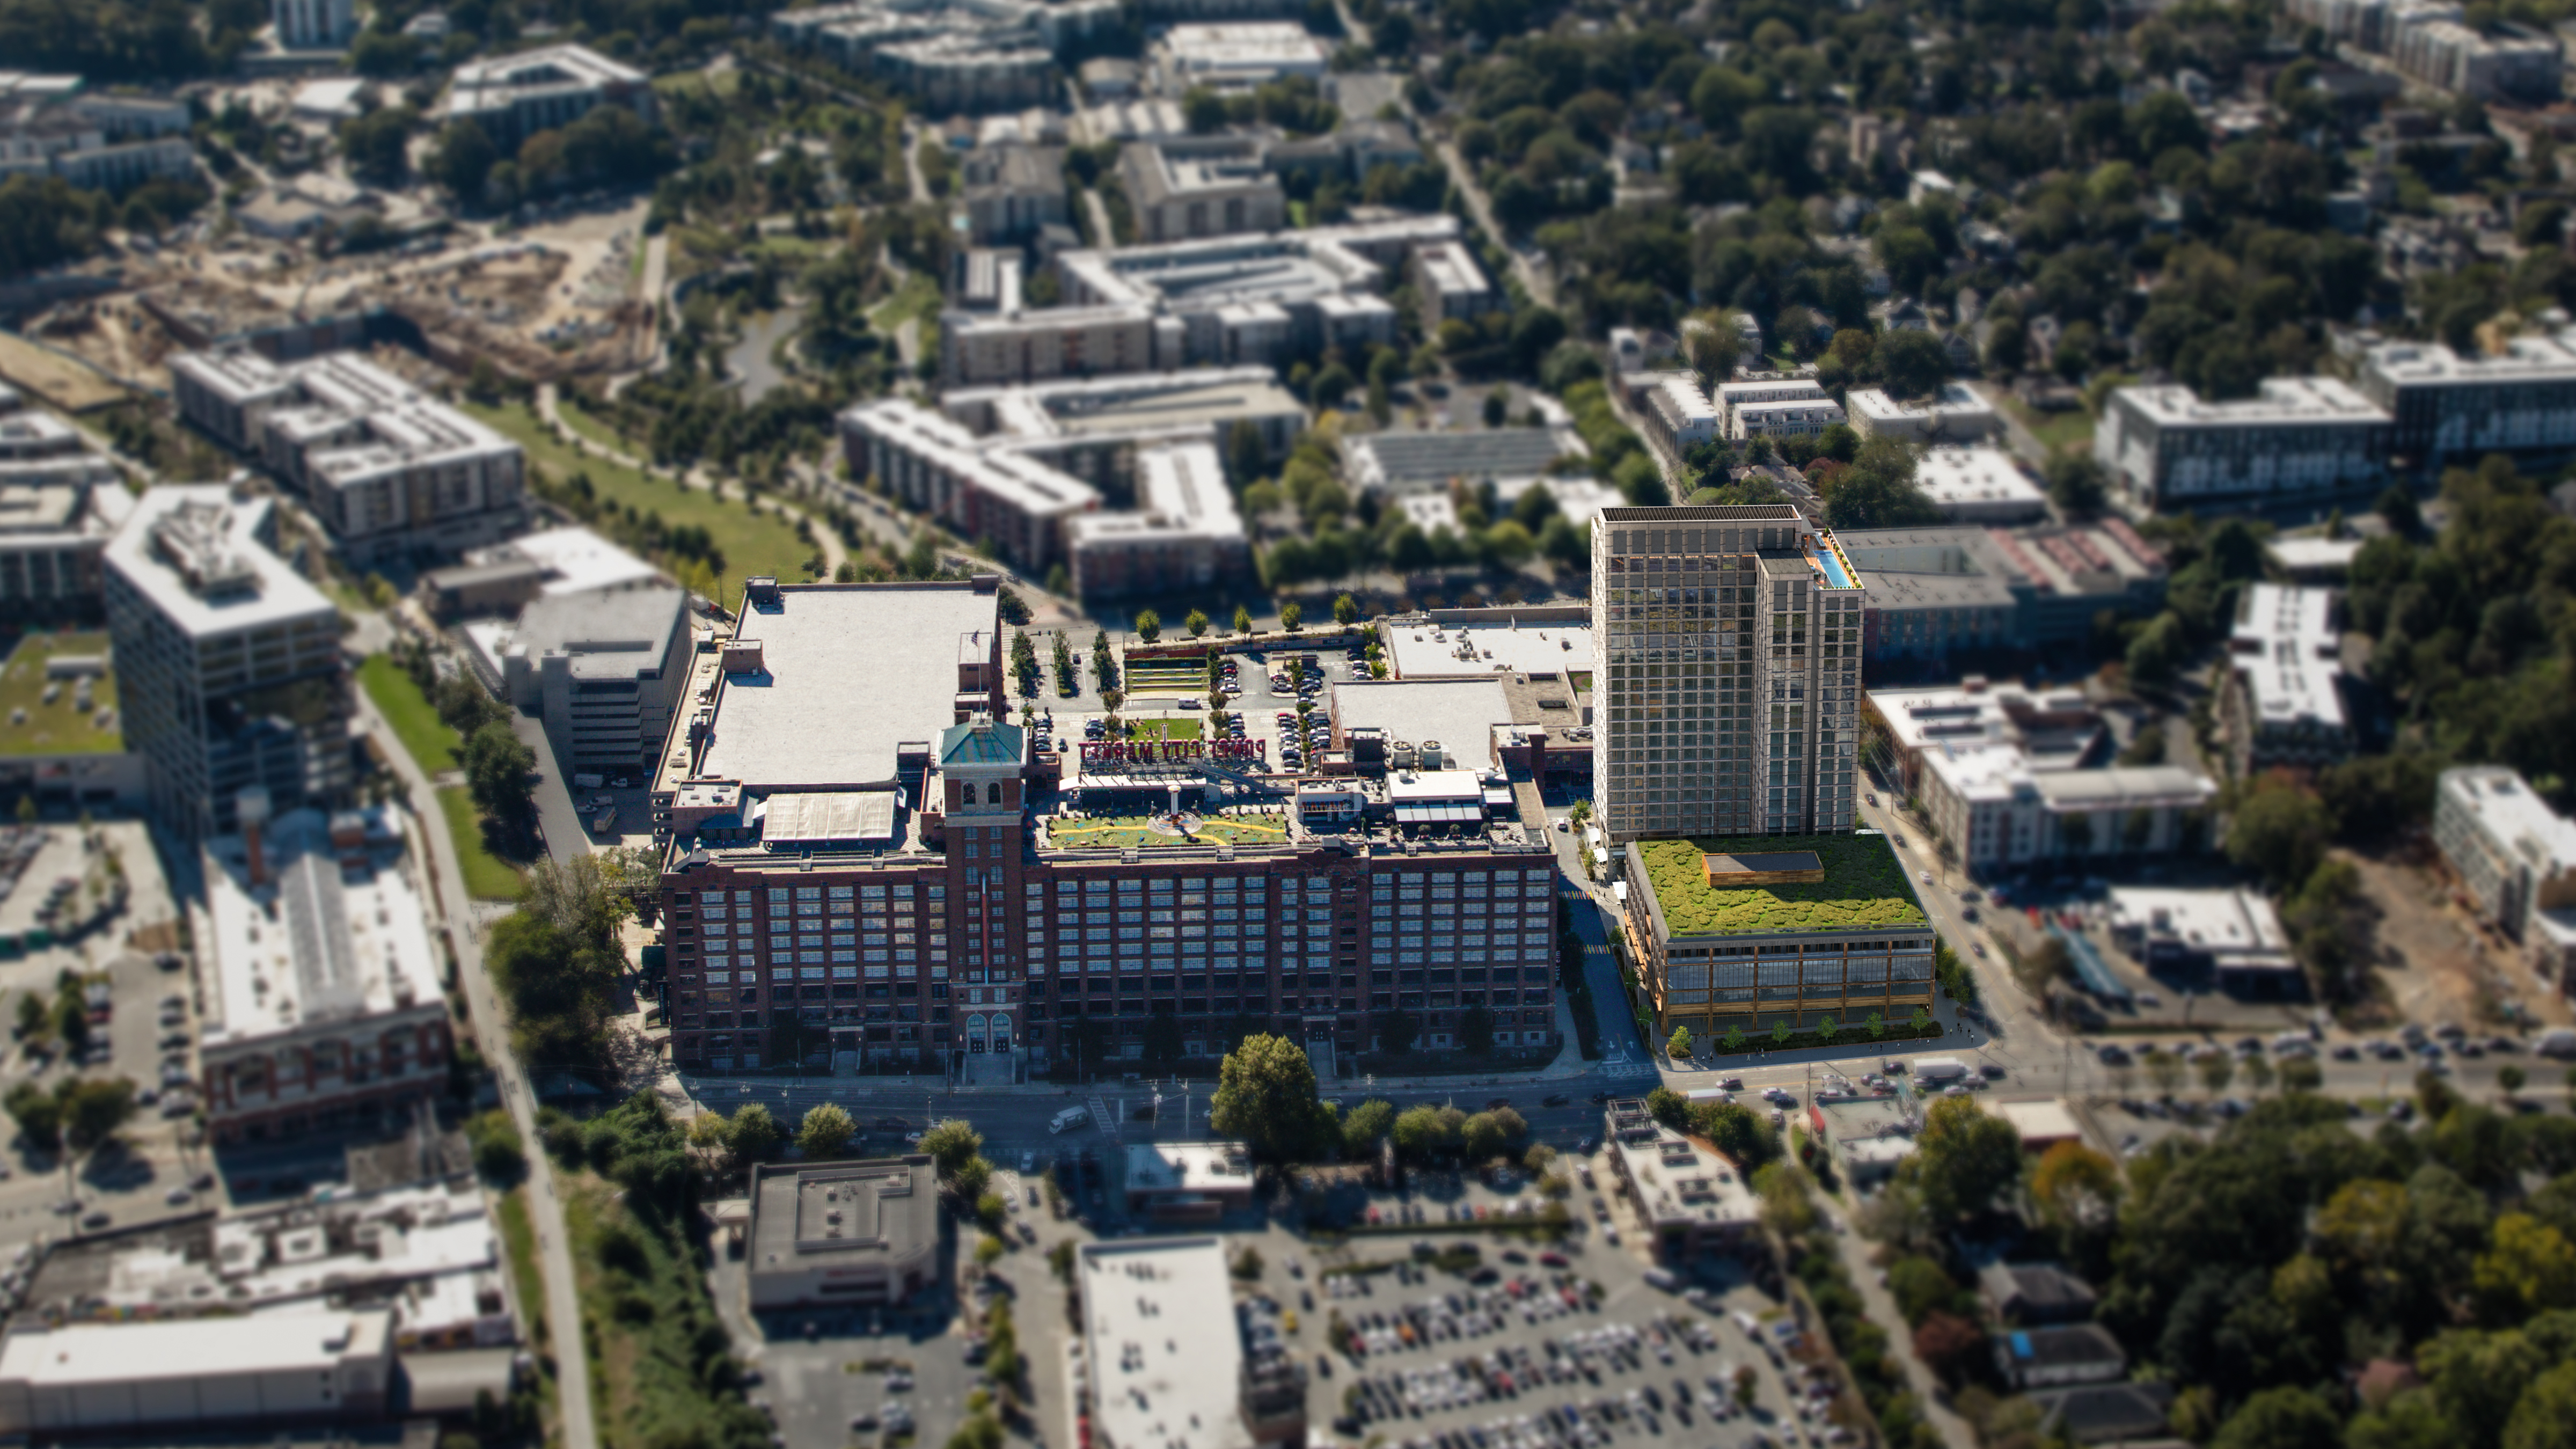 Ponce City Market's developer has bought posh Buckhead shopping district.  Now what? - Curbed Atlanta